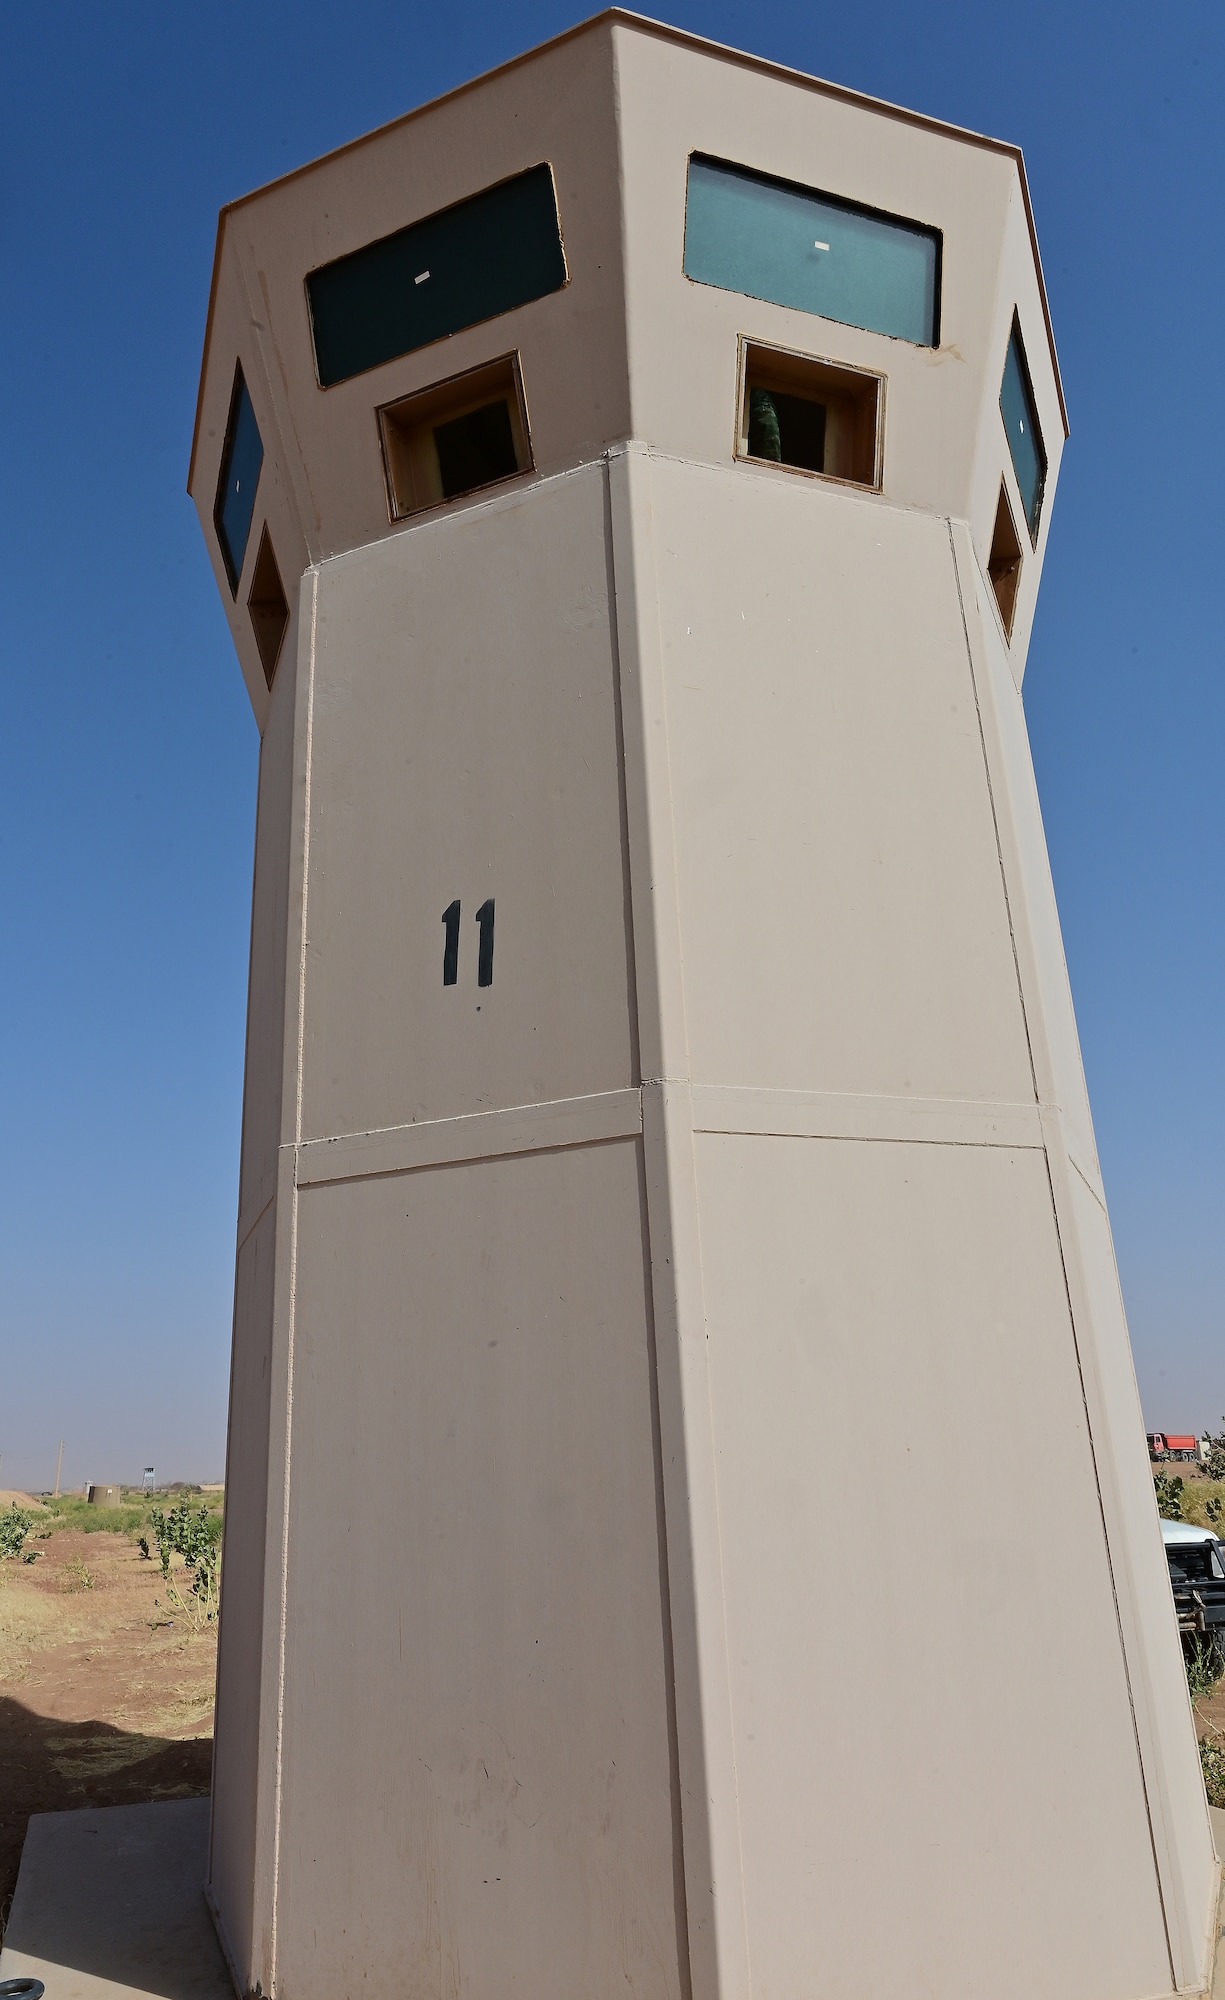 Security Forces members from the 409th Expeditionary Security Forces Squadron developed an innovative plan to make improvements to the guard towers at Nigerien Air Base 201, Agadez, Niger. The modifications included  a better firing platform, increased field of view and a more comfortable work environment for Defenders. (U.S. Air Force photo by Tech. Sgt. Stephanie Longoria)